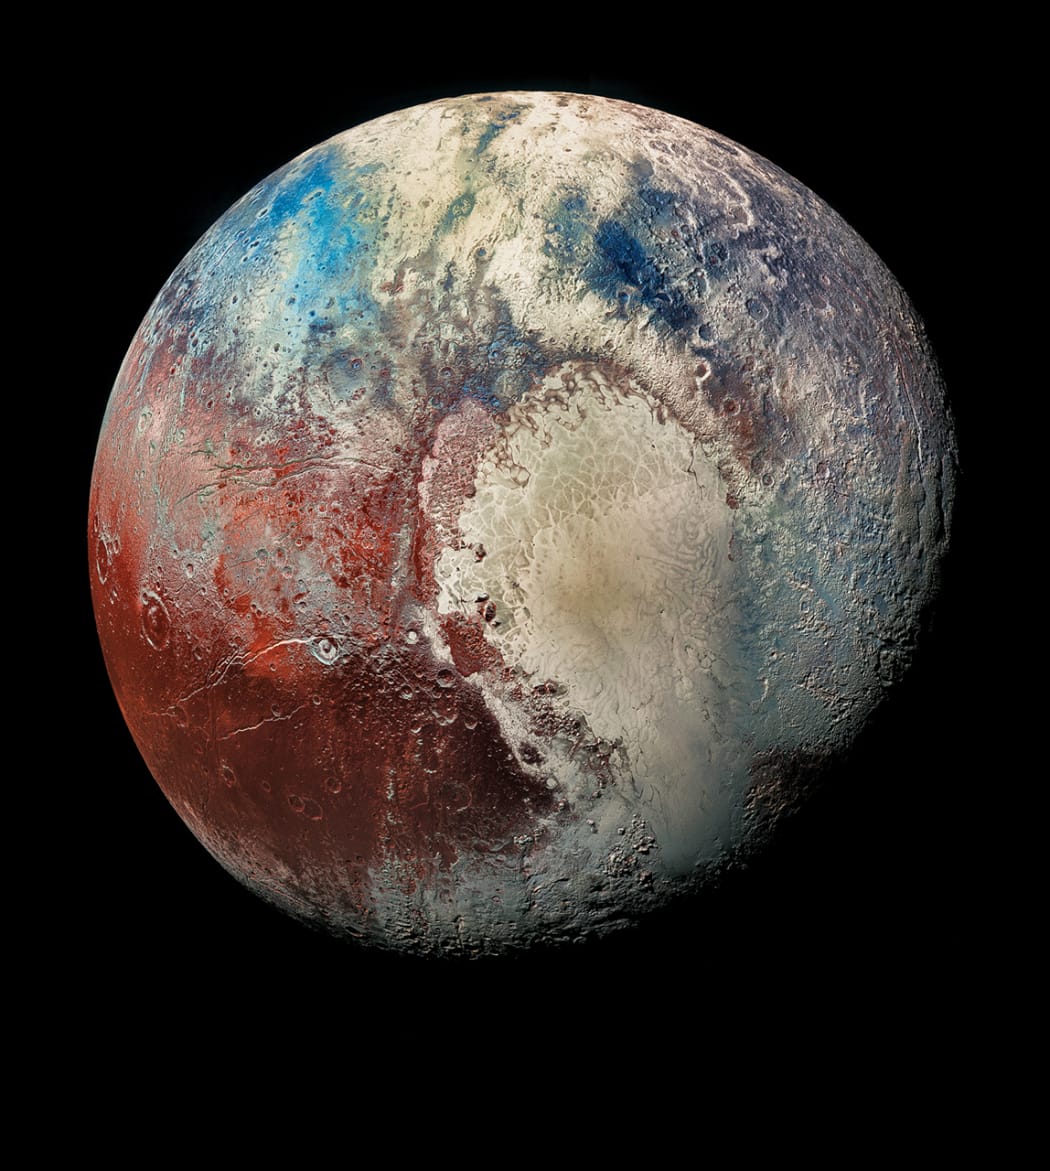 In this image of Pluto's surface, the red luminance corresponds to the infrared data acquired by the Ralph/MVIC instrument carried by New Horizons.